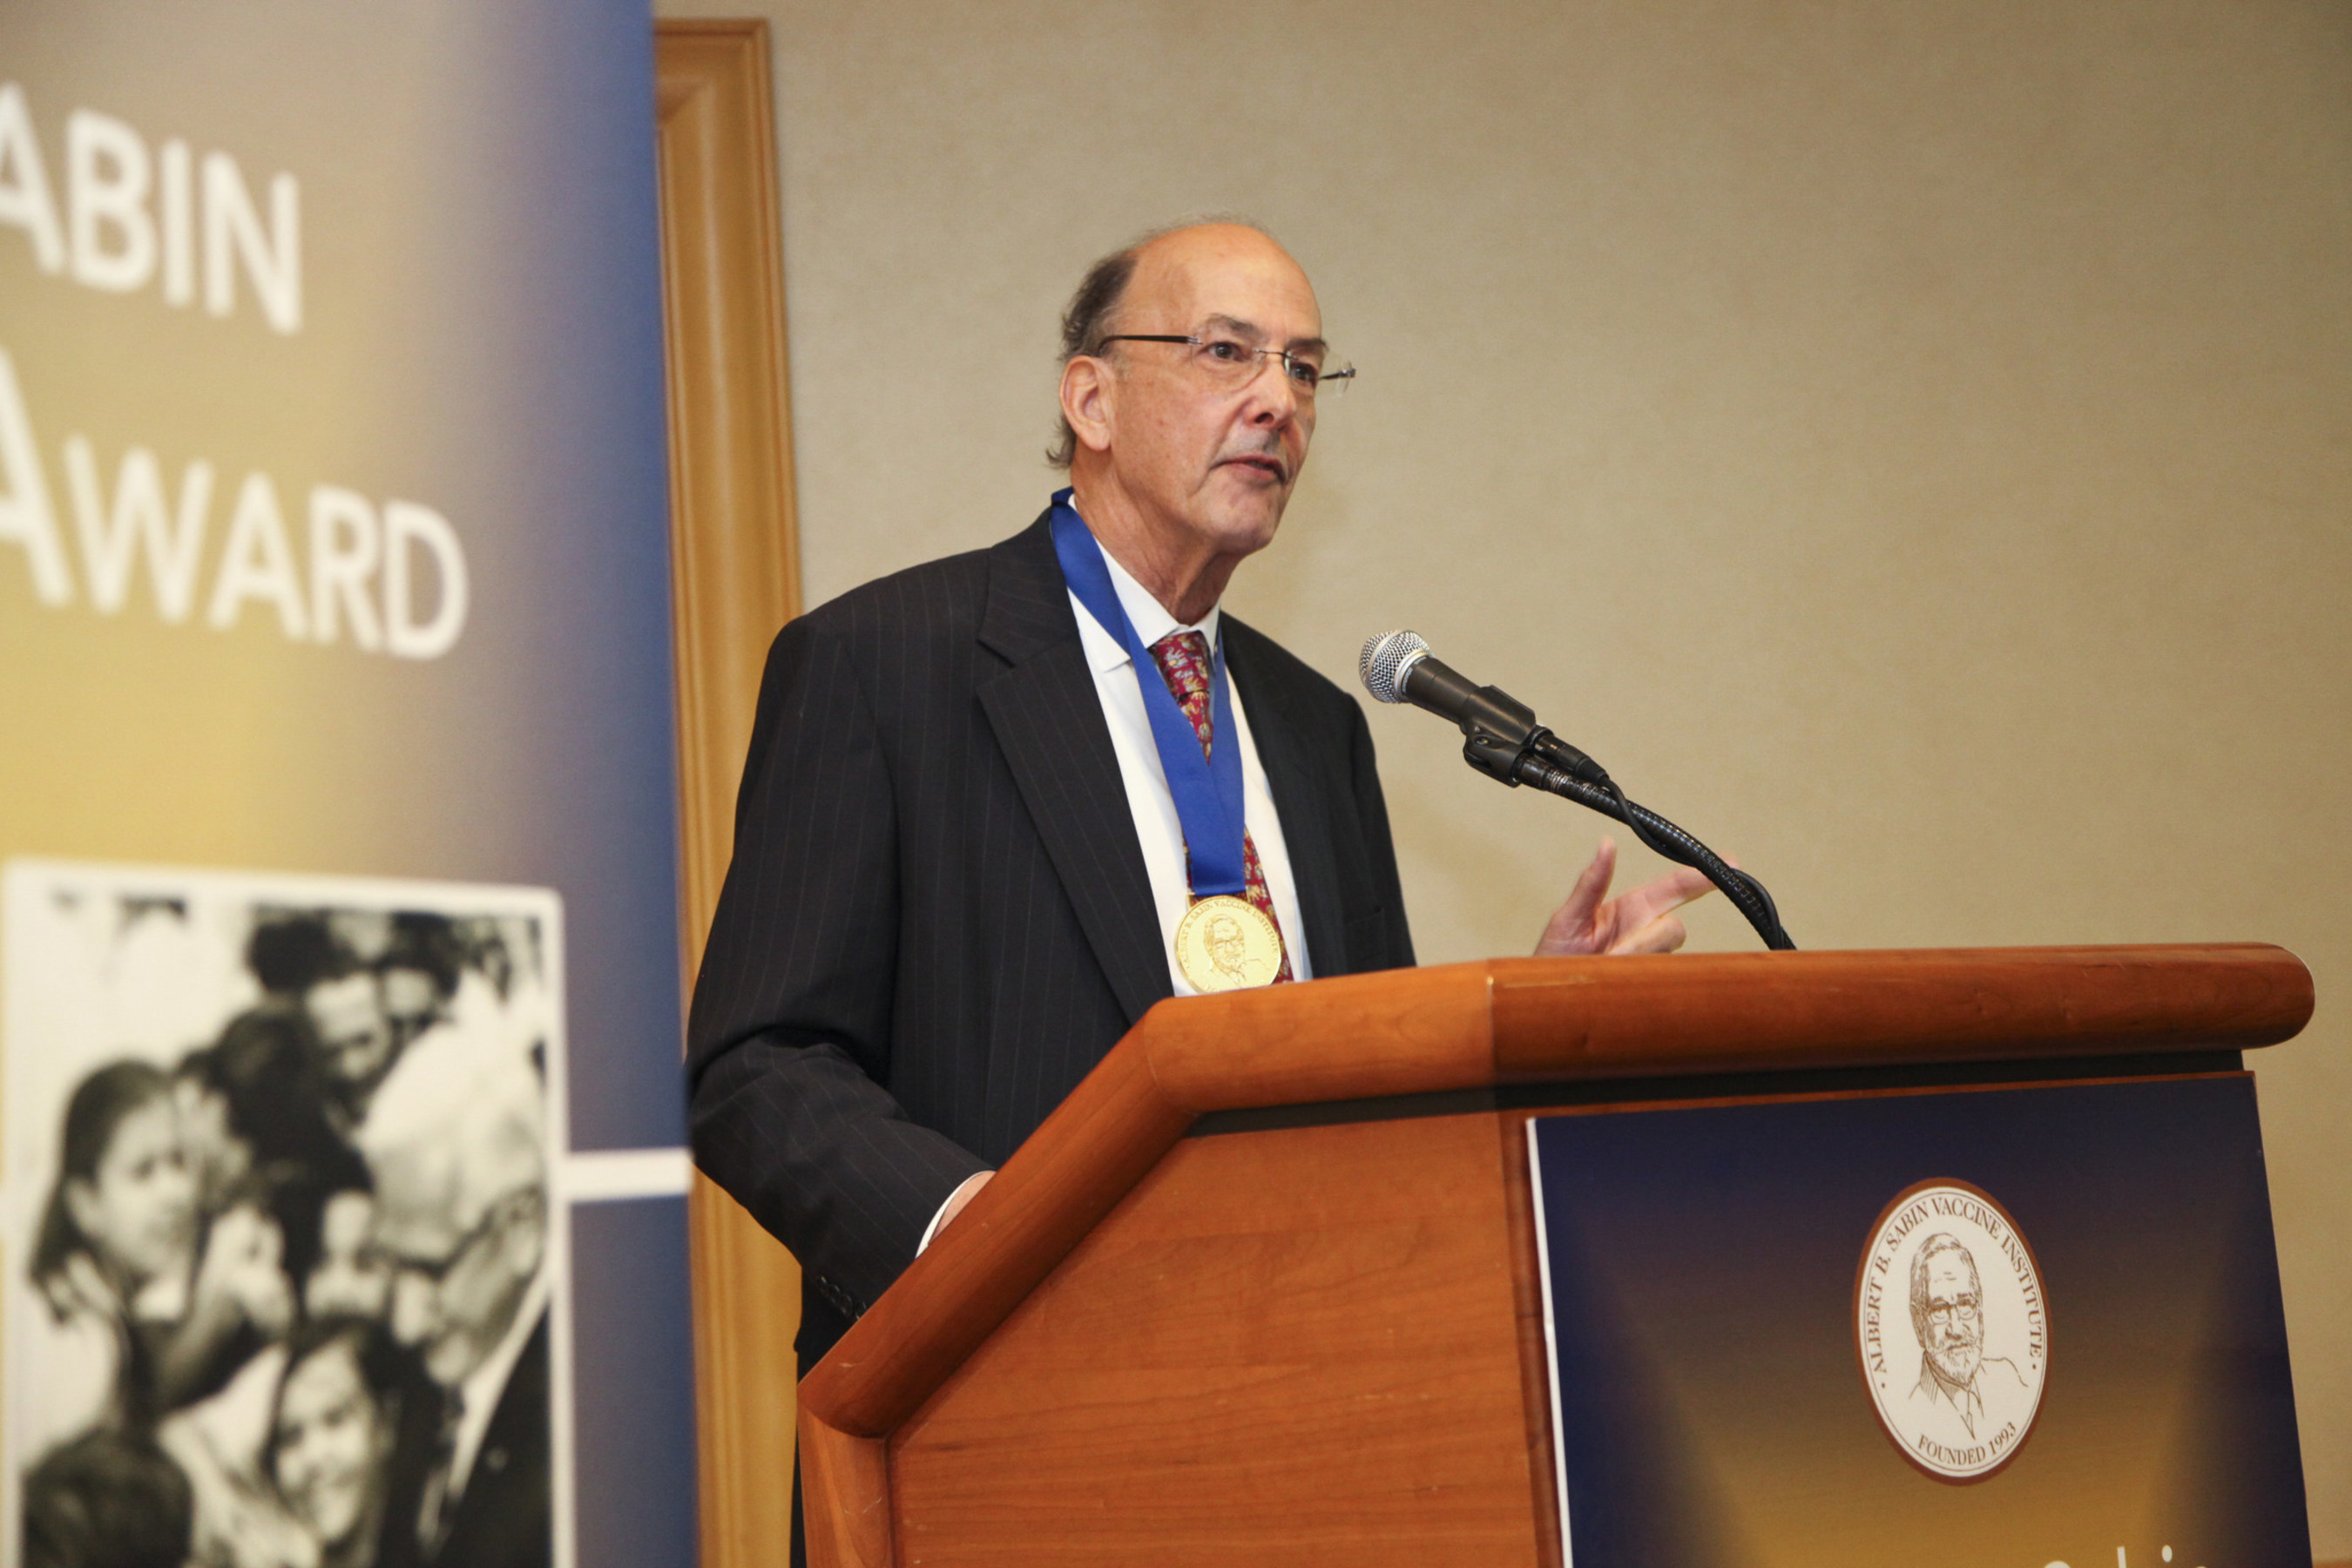 Roger I. Glass, MD, PhD, receives the 2015 Albert B. Sabin Gold Medal Award for his many contributions to improving children's health worldwide, including novel scientific research for the prevention of gastroenteritis from rotaviruses and noroviruses. Photo: Mignonette Dooley Johnson, on behalf of the Sabin Vaccine Institute